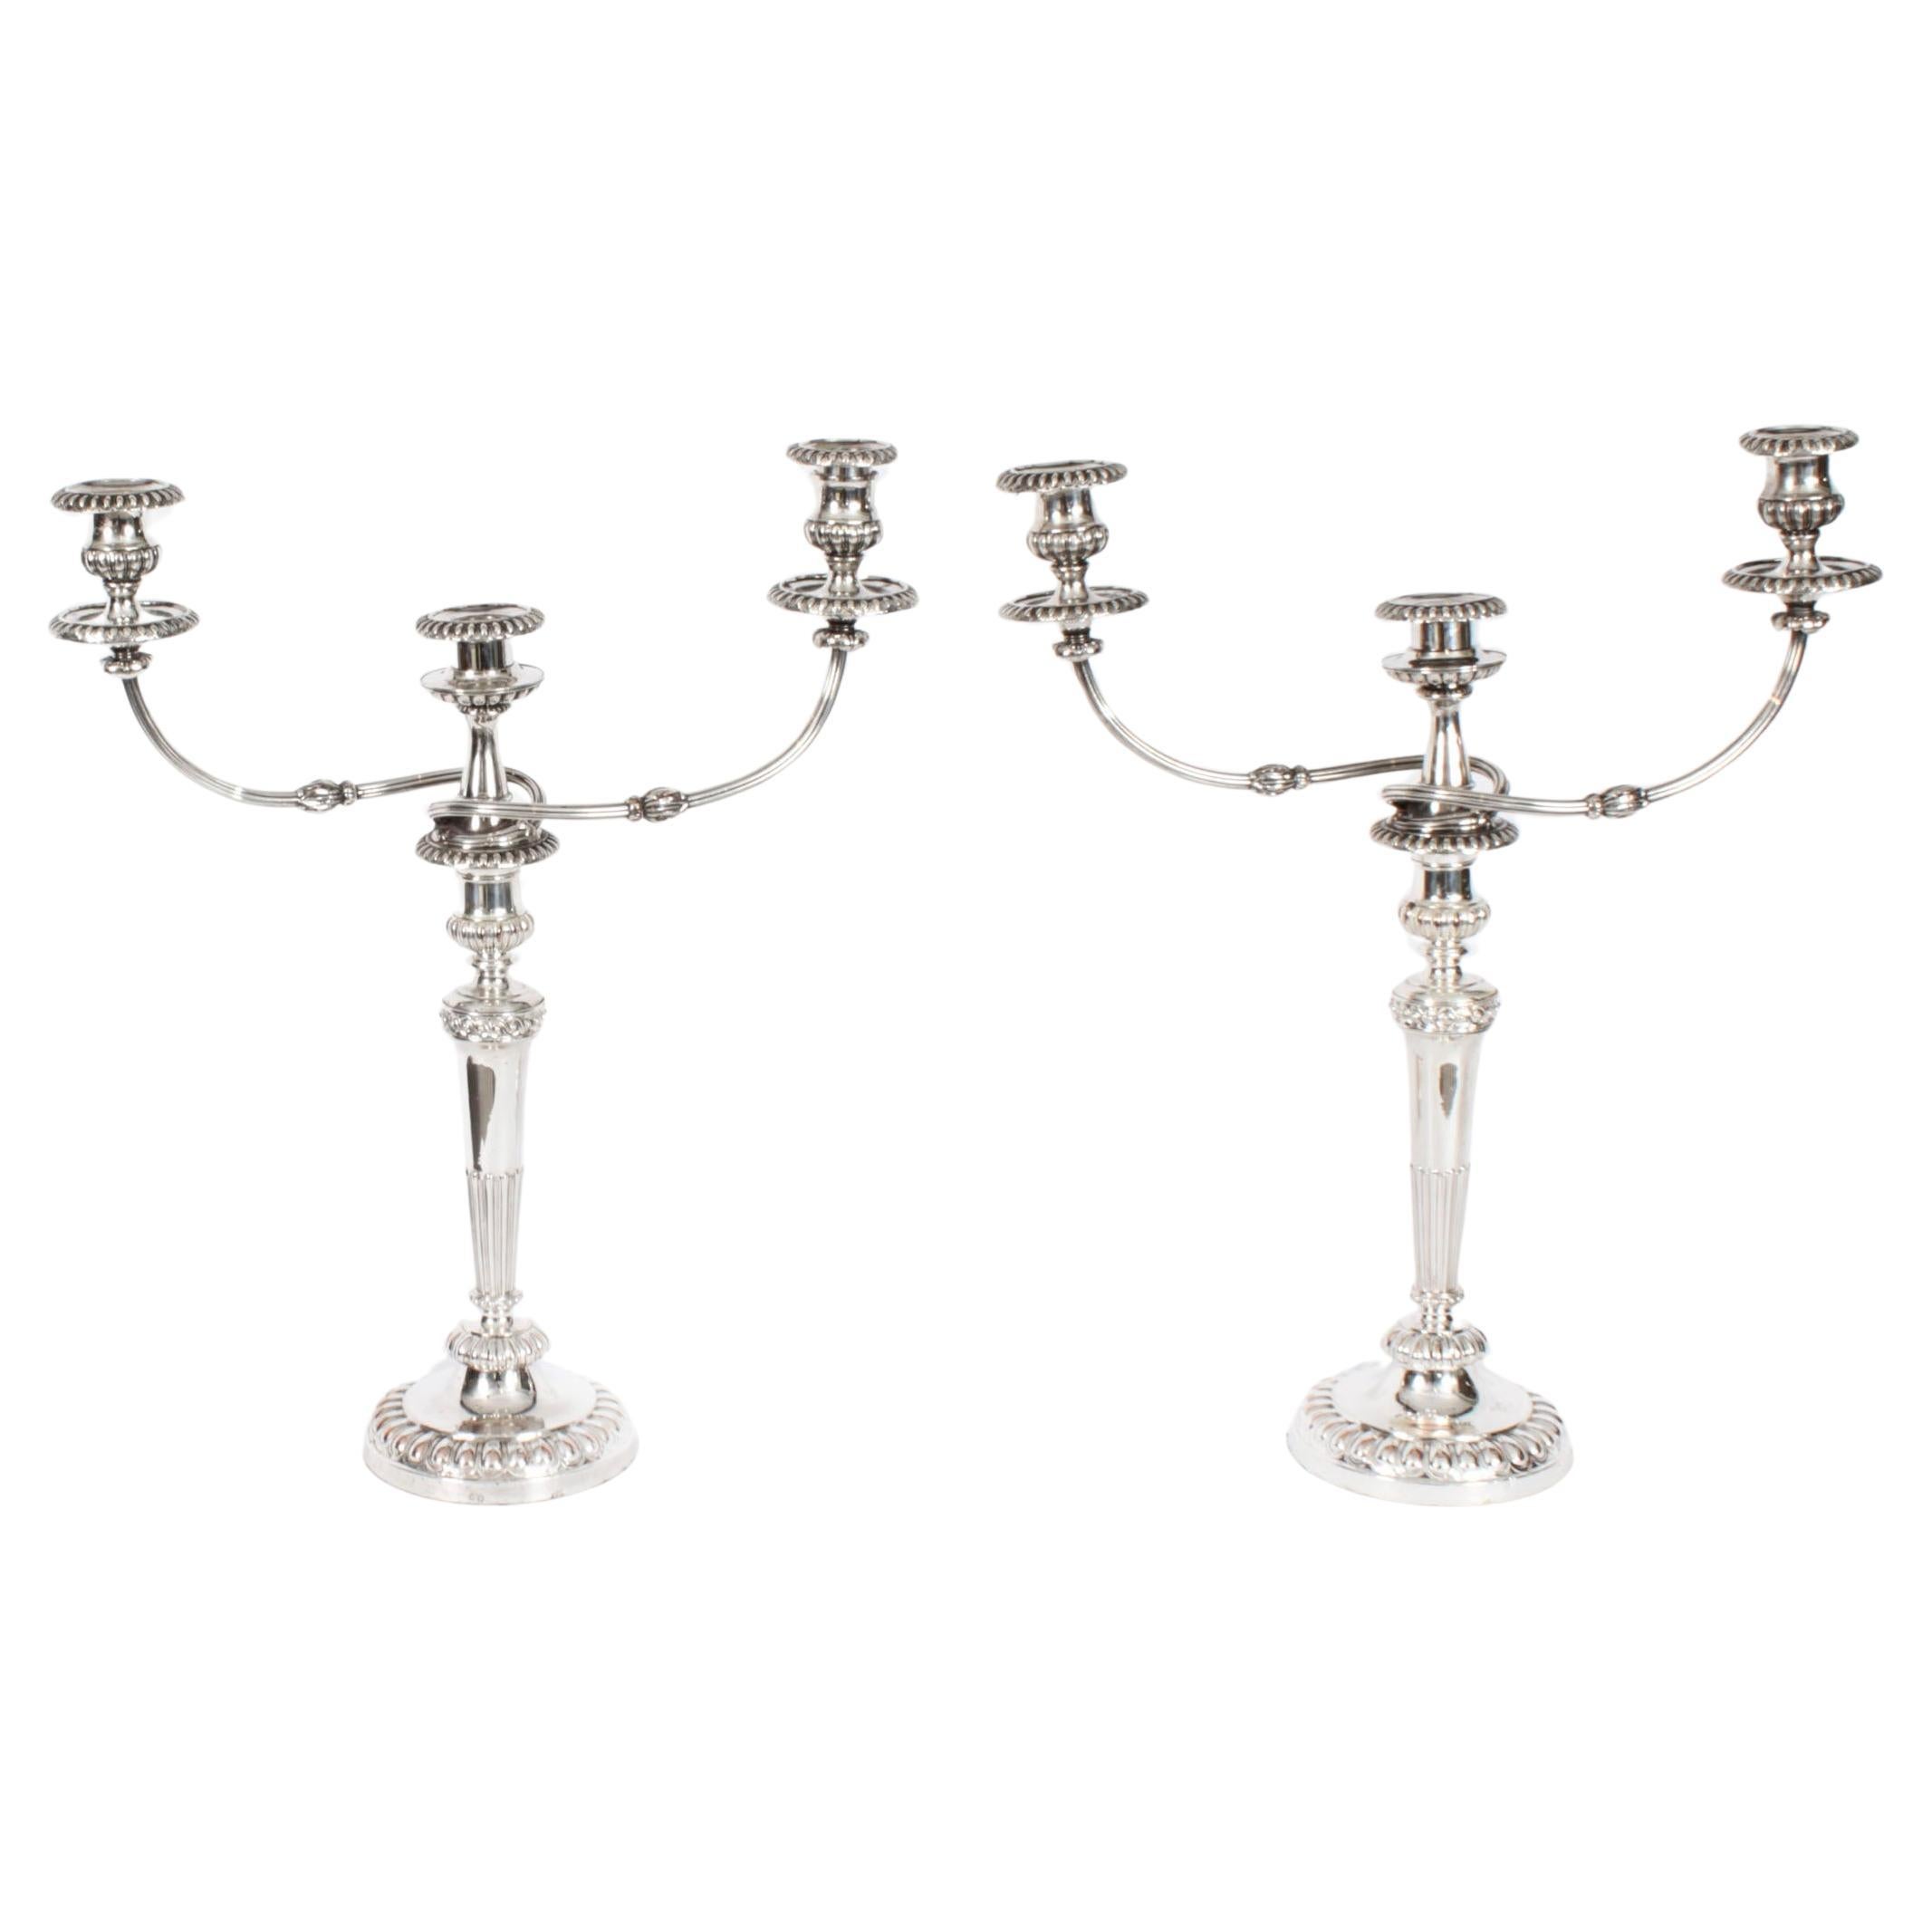 Antique Pair 21inch George III Three Light Candelabra by Matthew Boulton 18th C For Sale